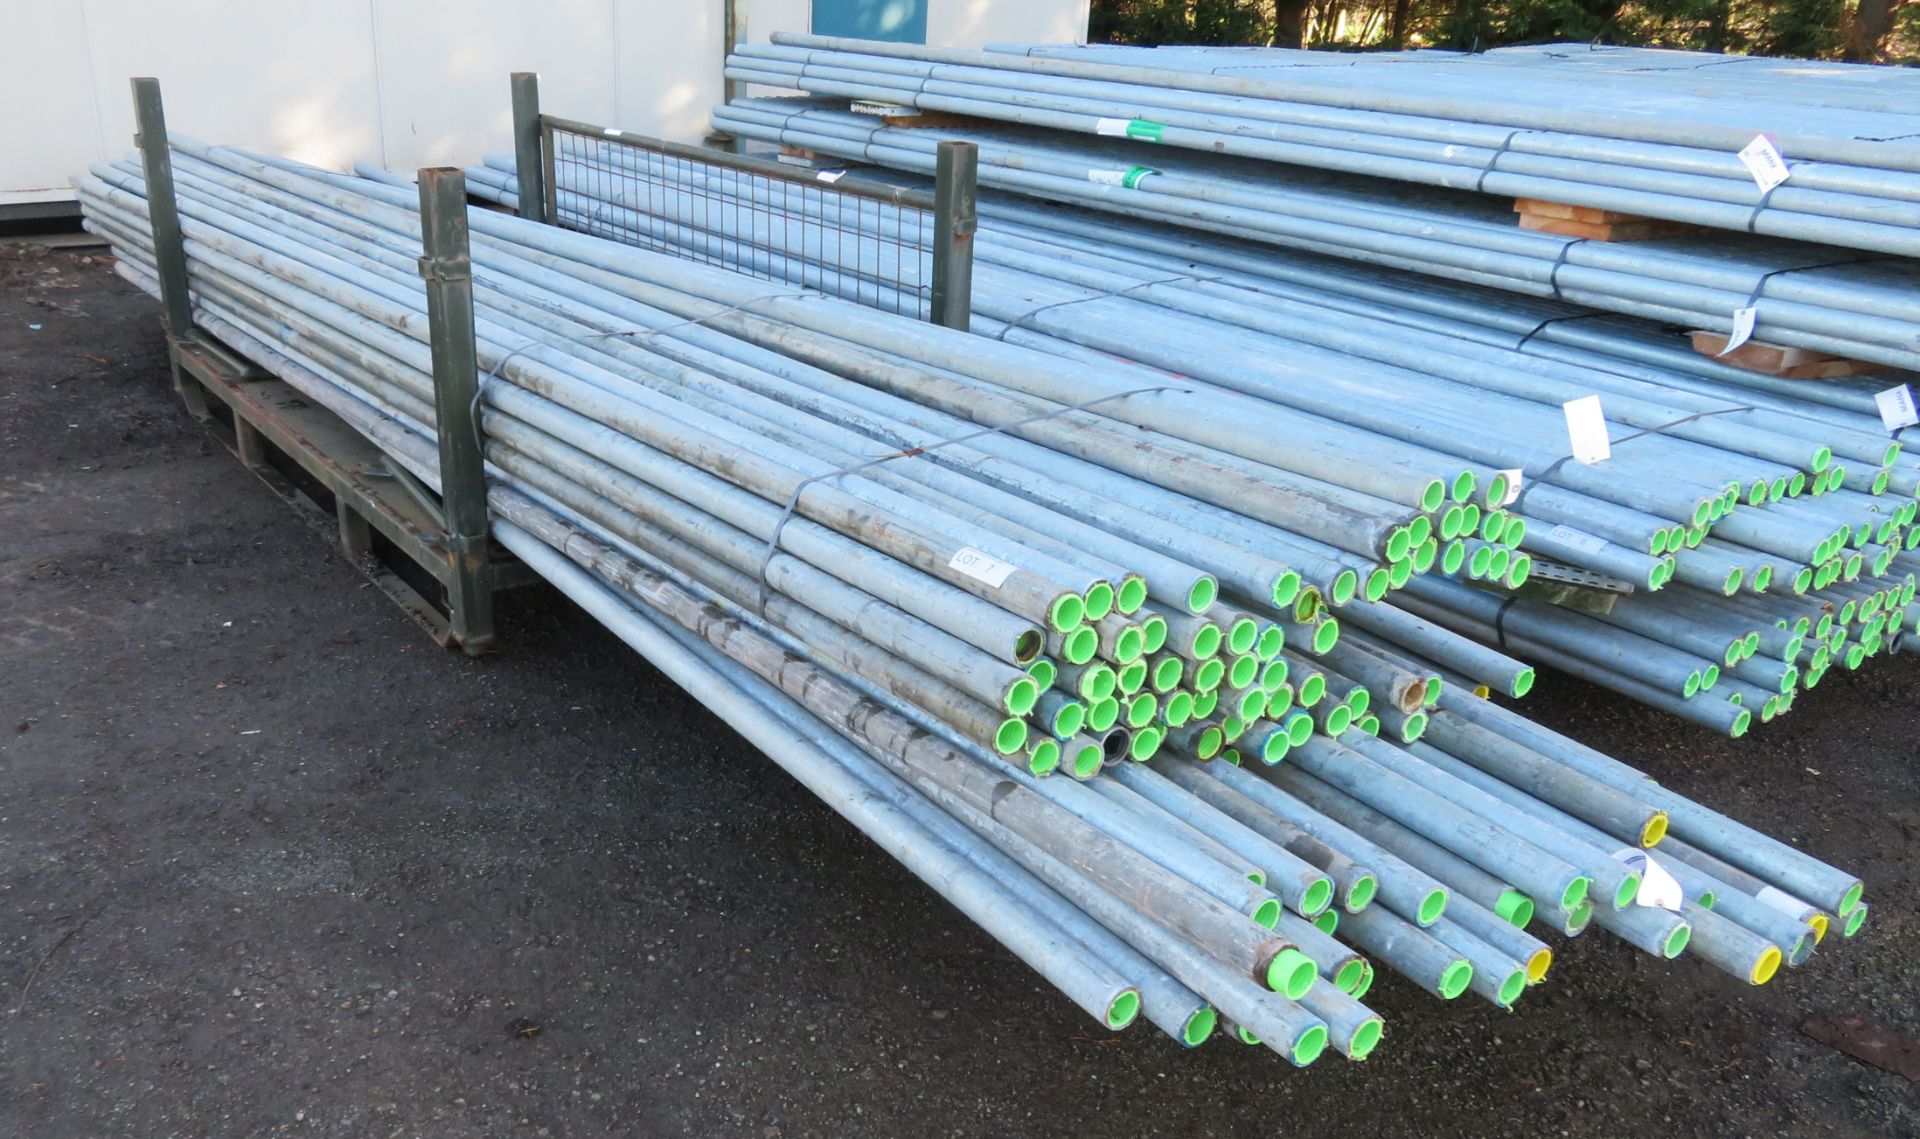 100x 16ft Galvanised Steel Scaffolding Poles 48mm Diameter x 4mm Thick. - Image 2 of 4